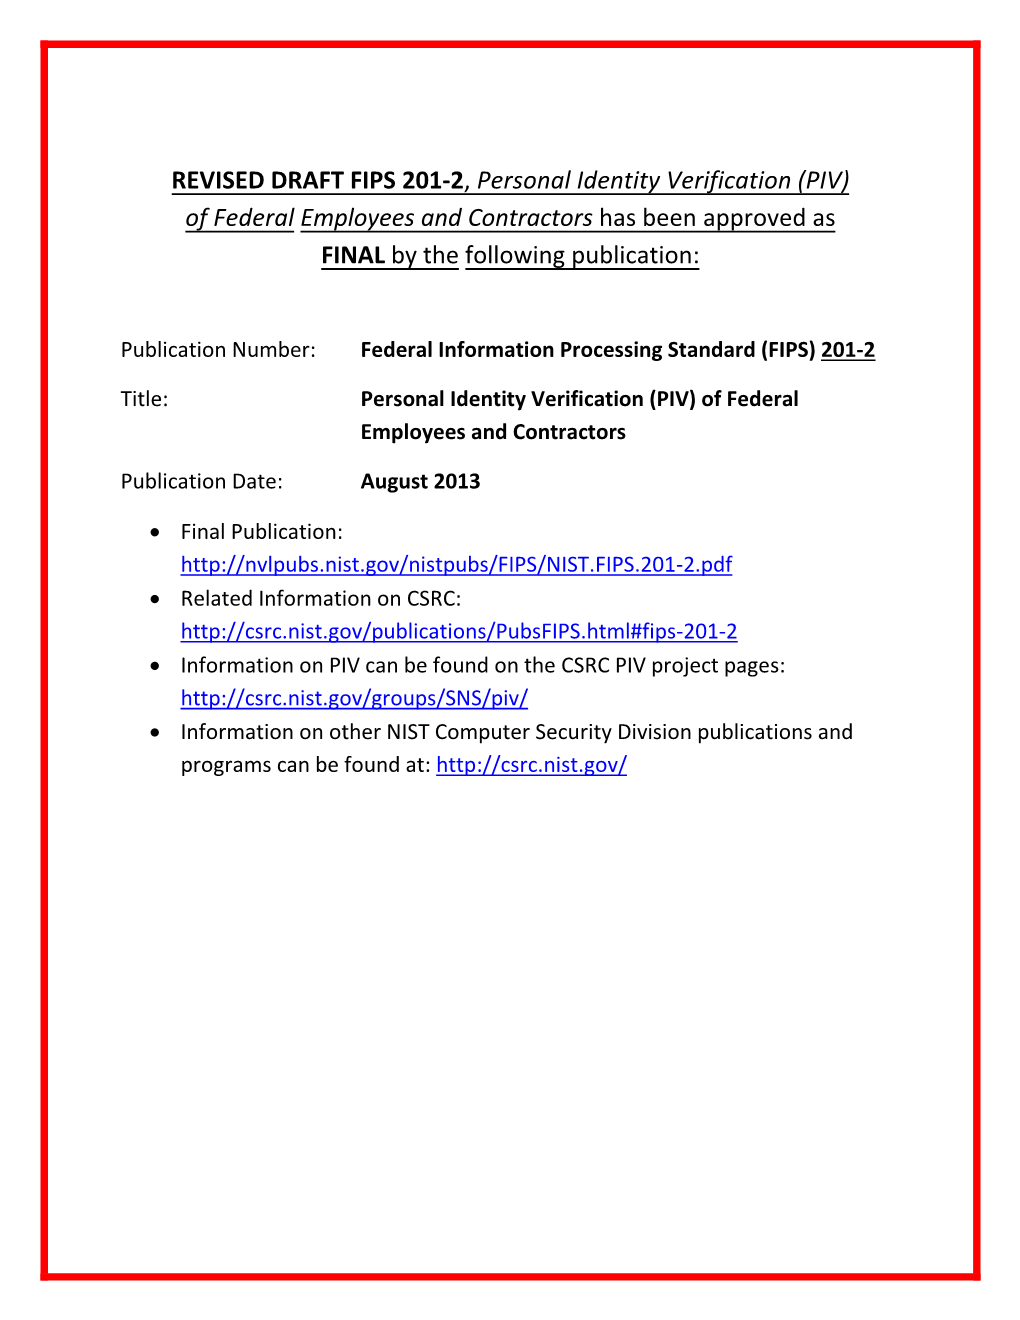 Revised Draft FIPS 201-2 (July 2012), Personal Identity Verification of Federal Employees and Contractors